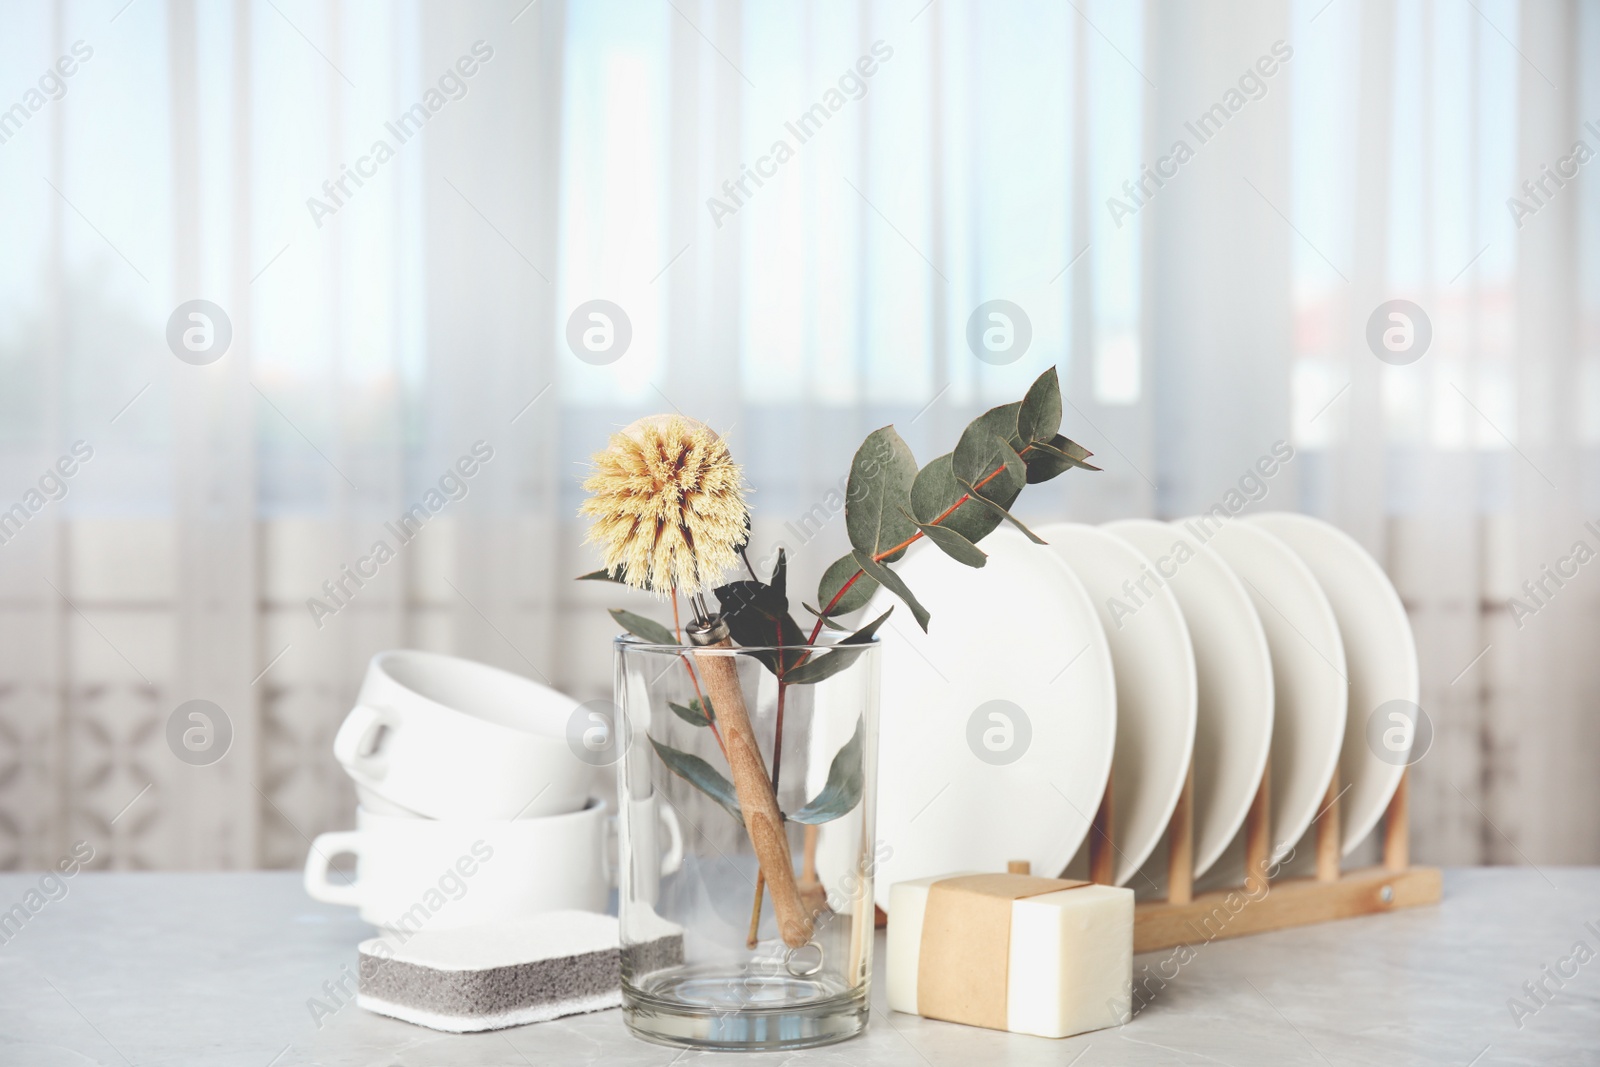 Photo of Cleaning supplies for dish washing on grey marble table indoors